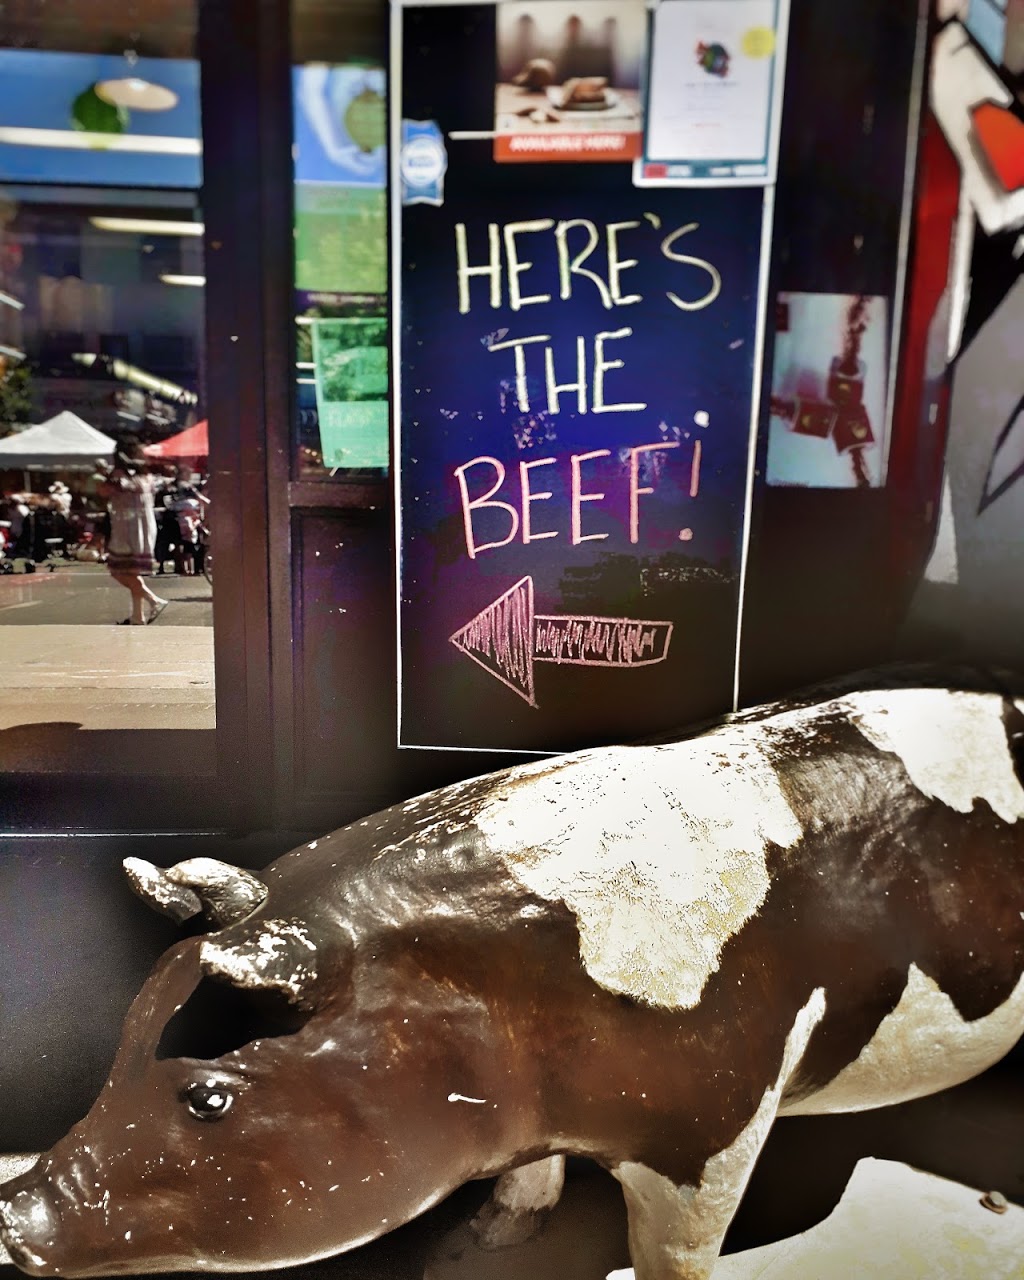 Royal Beef | store | 1968 Danforth Ave, Toronto, ON M4C 1J6, Canada | 4164211029 OR +1 416-421-1029